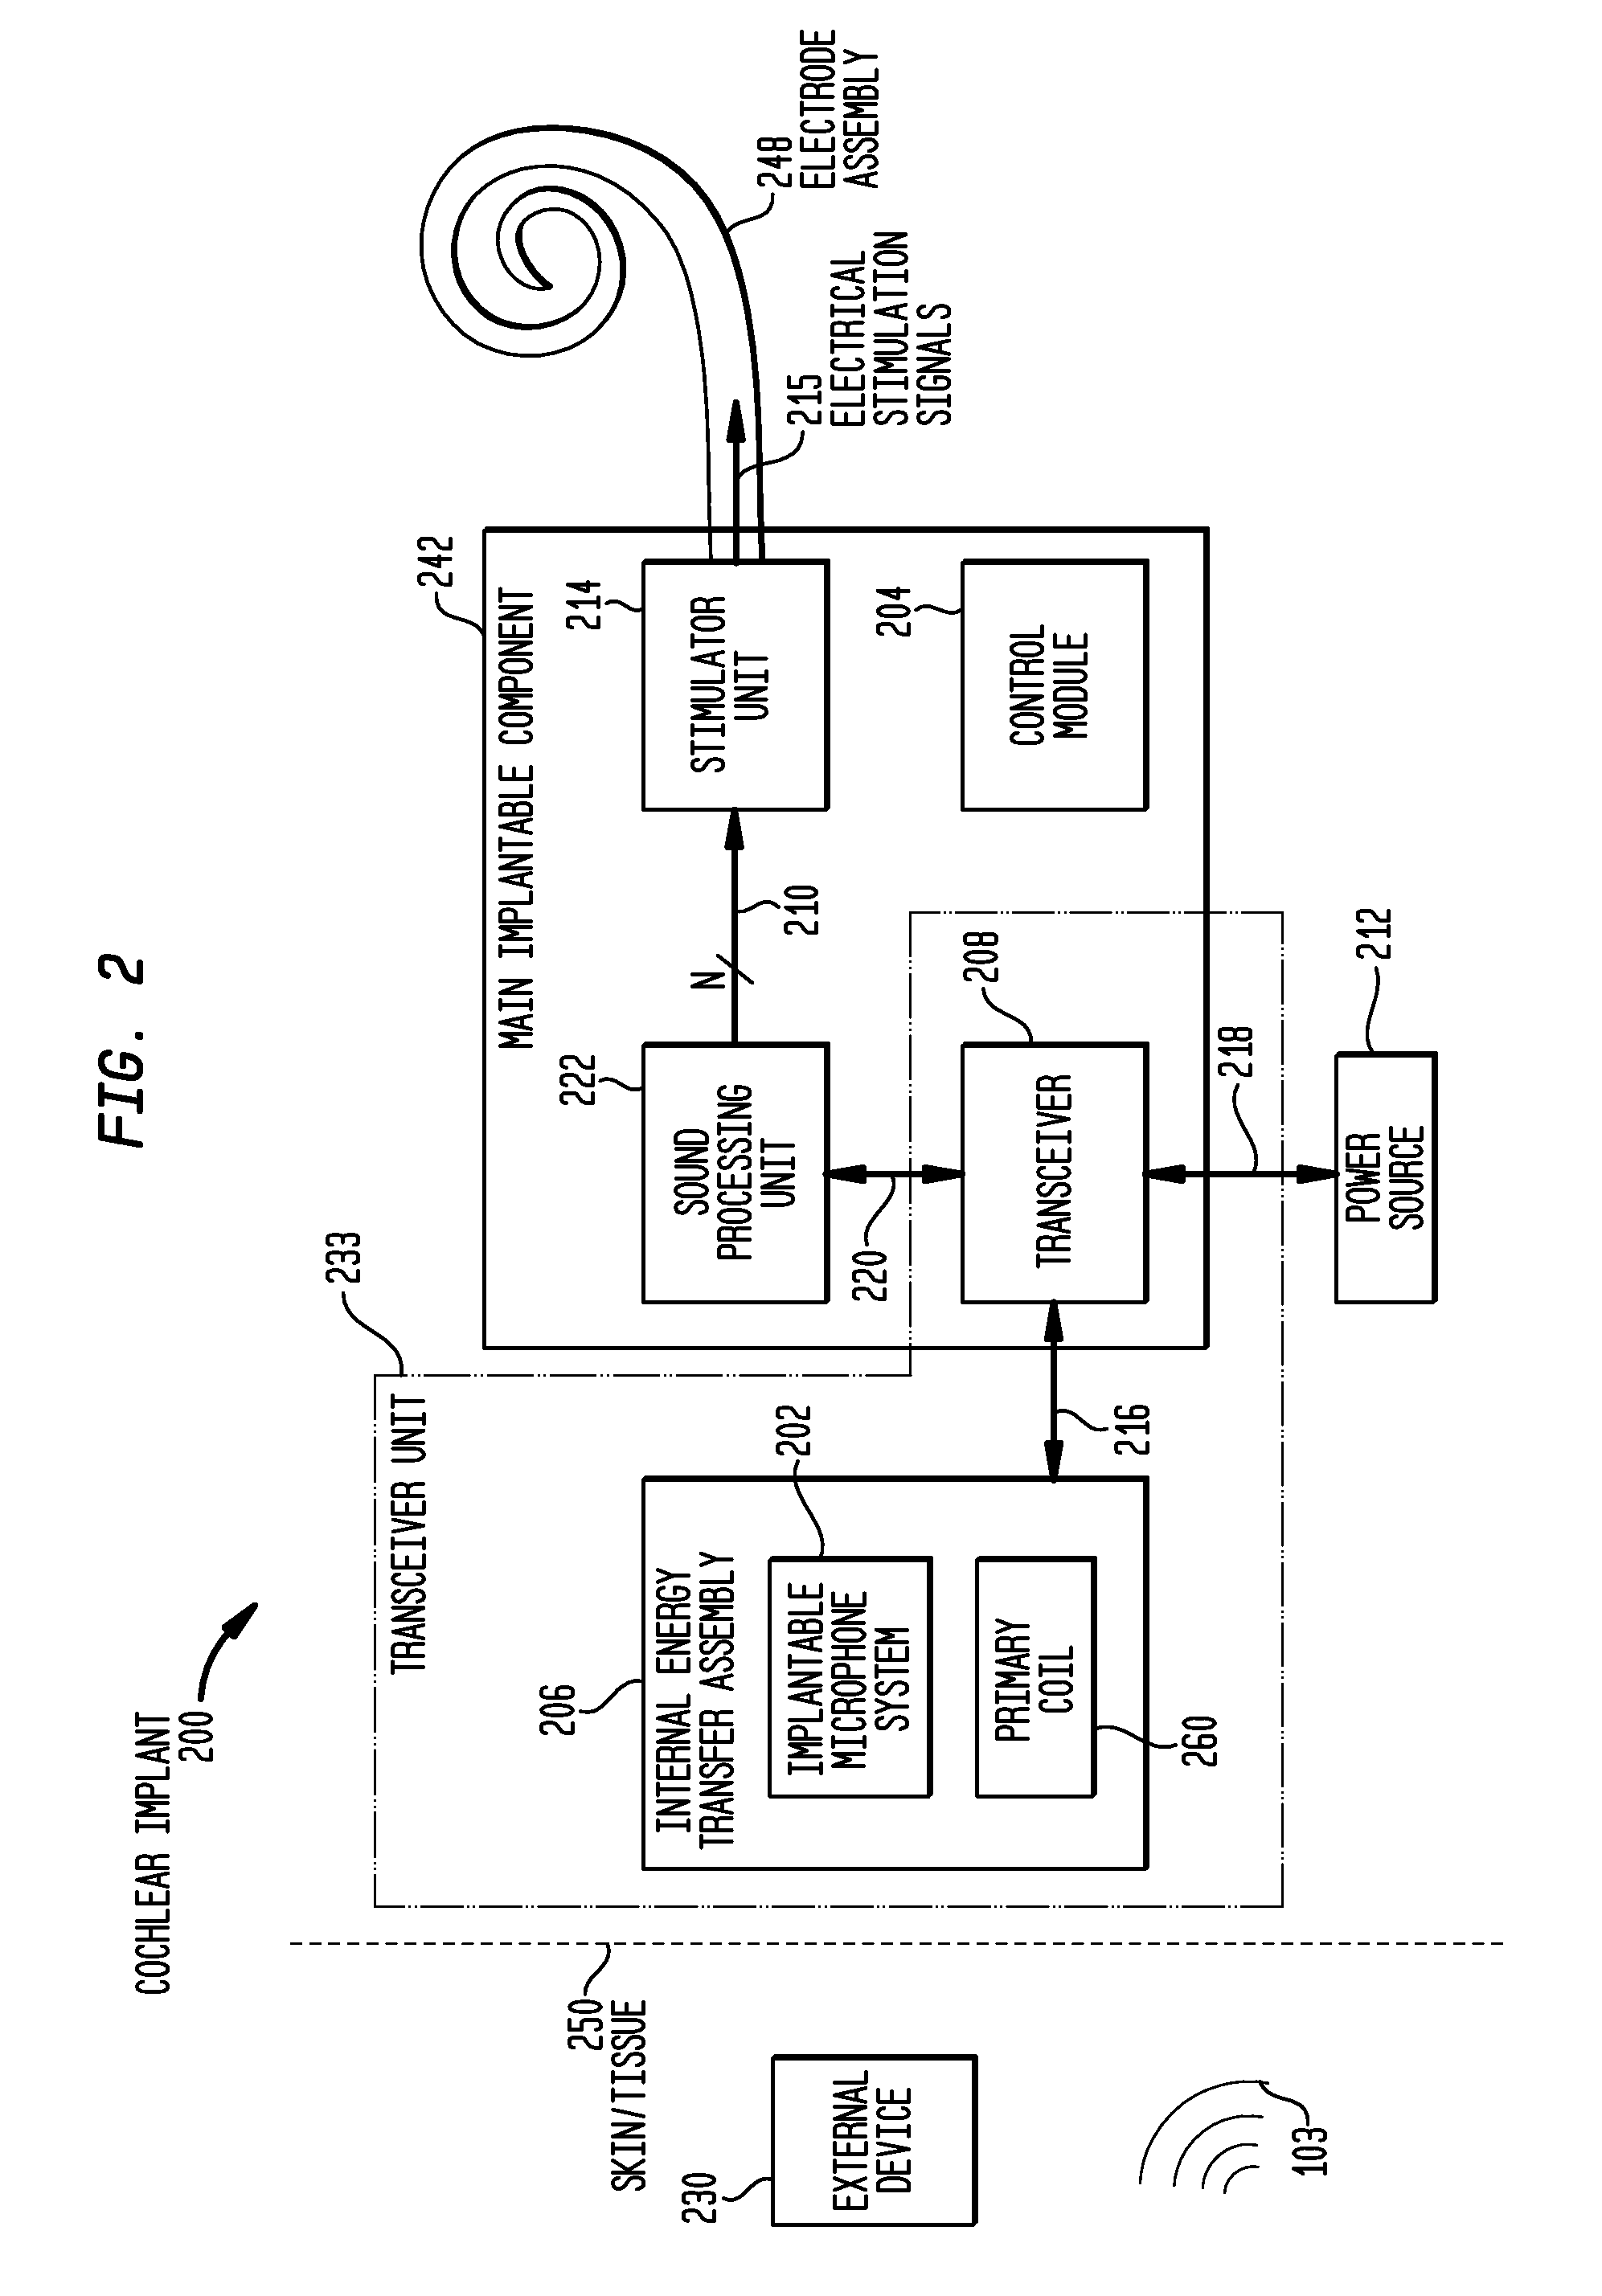 Implantable microphone system